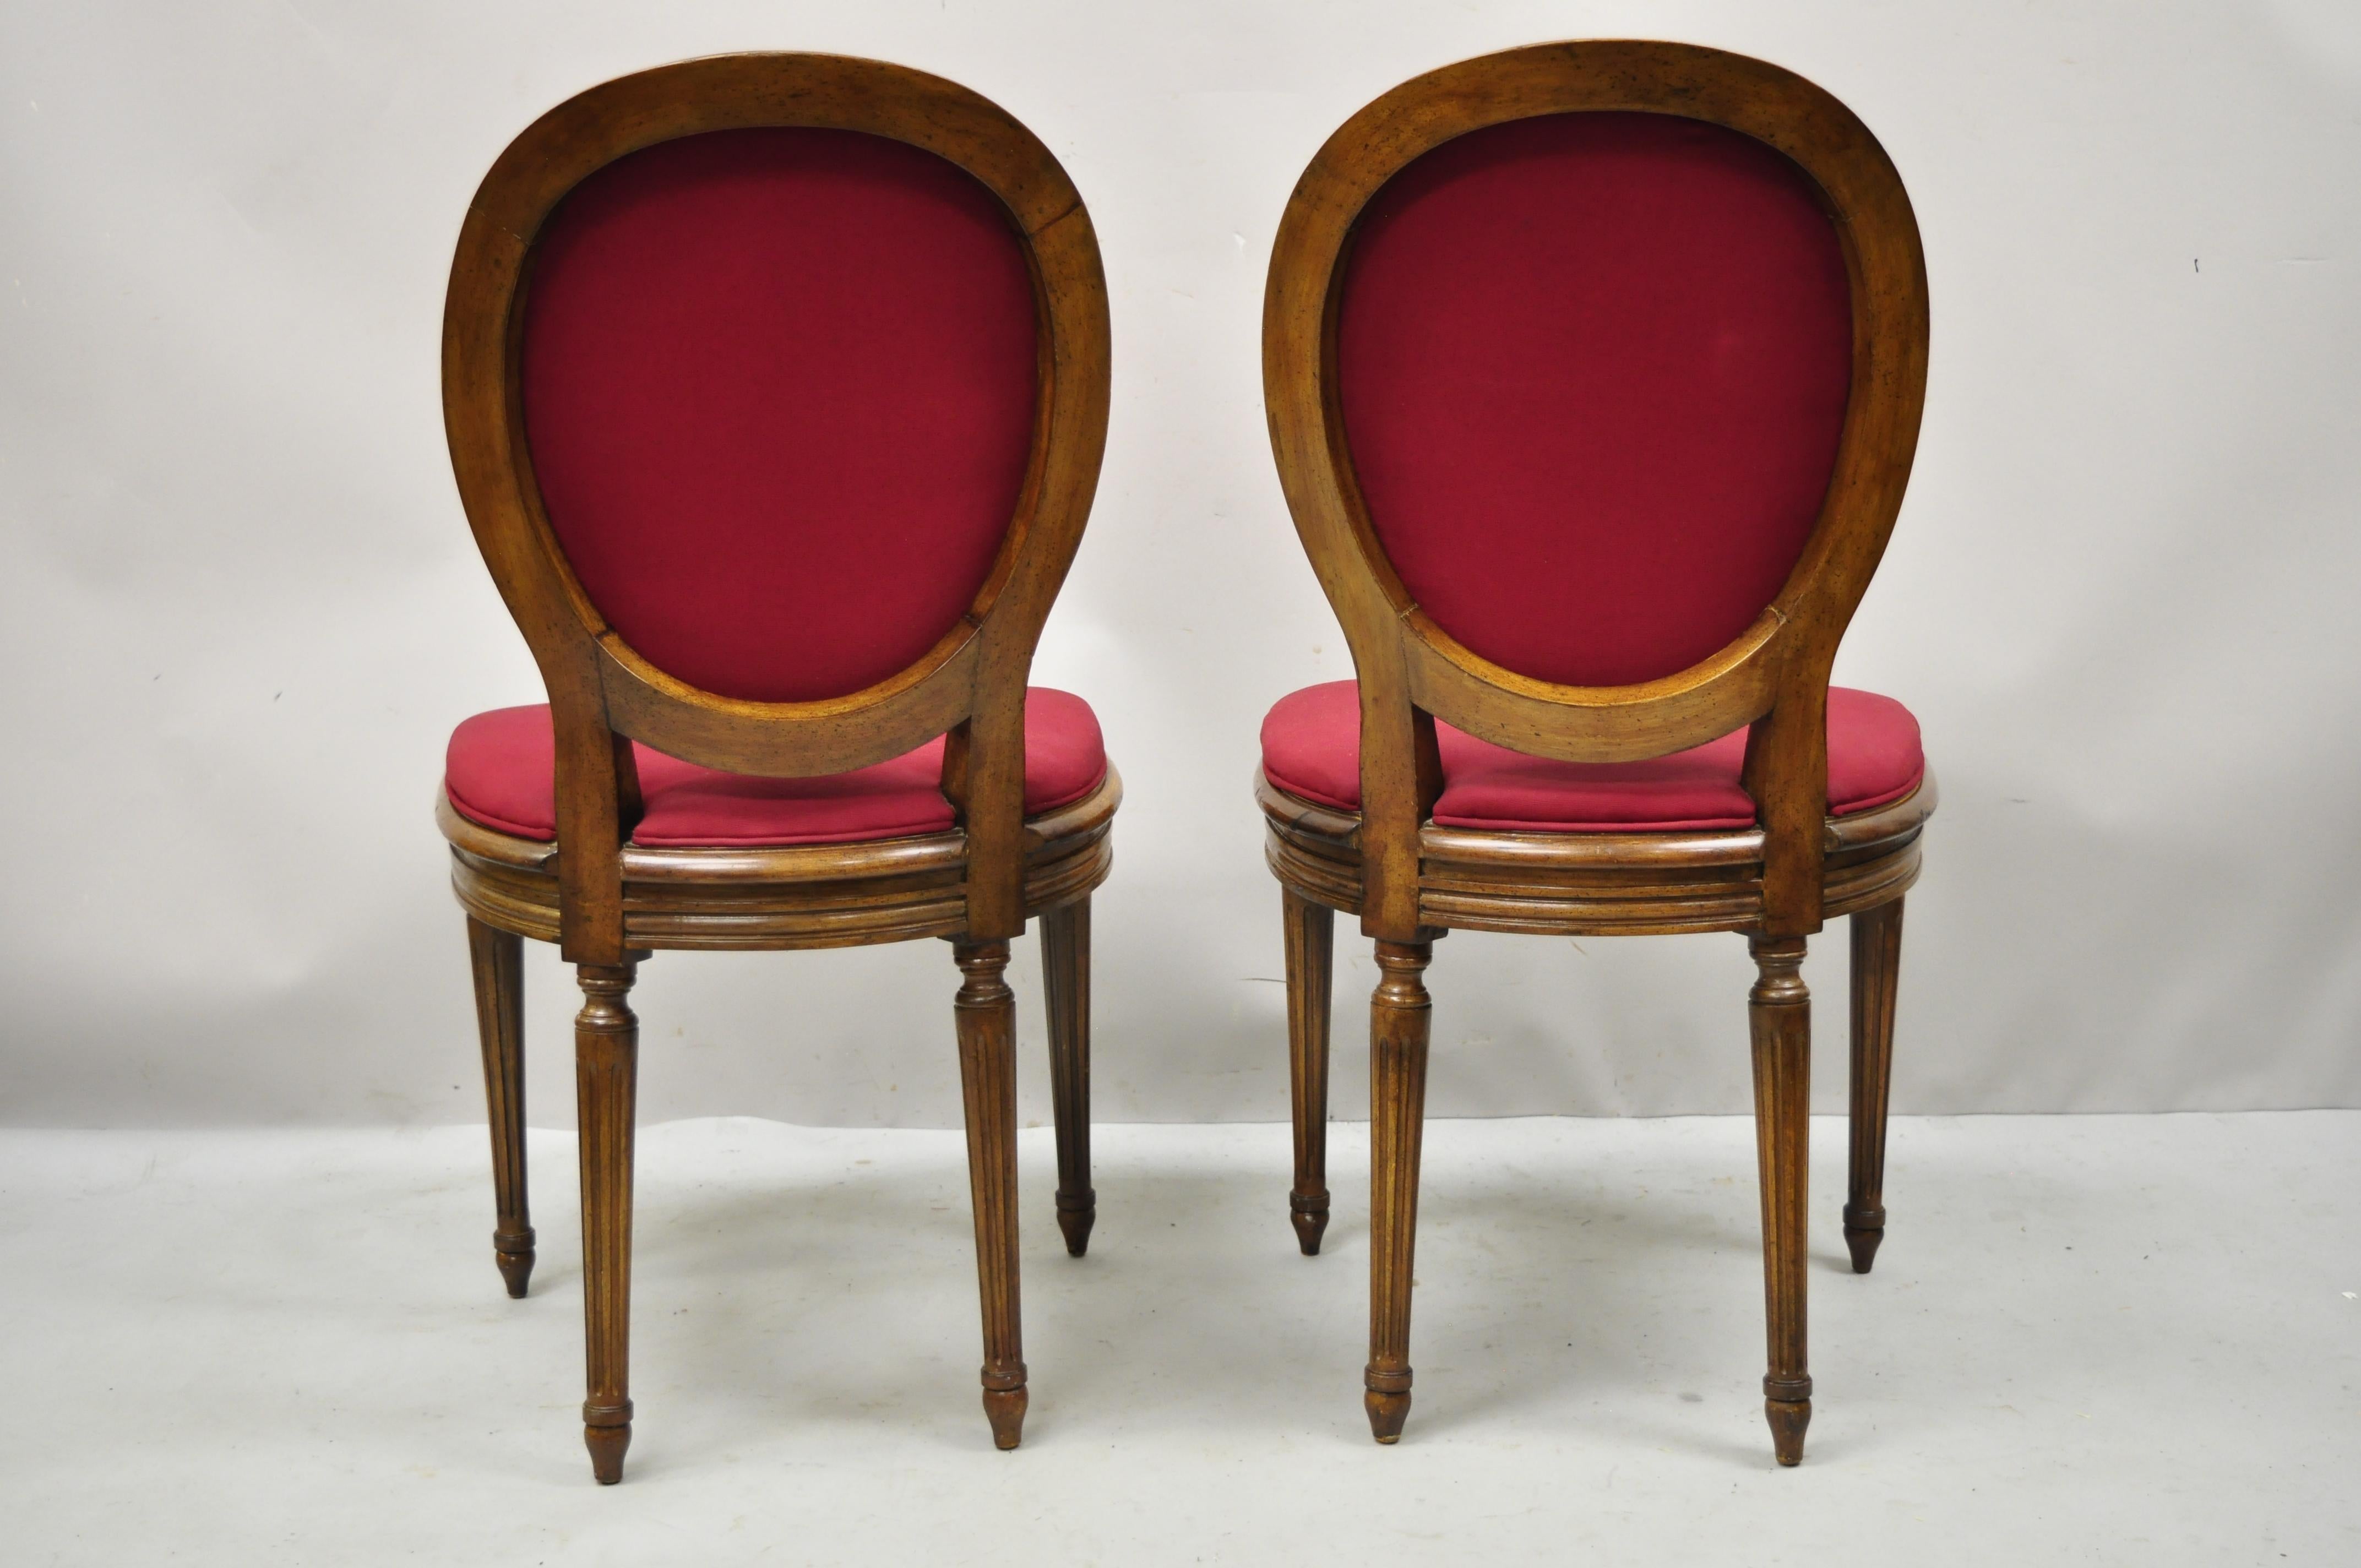 Vintage French Louis XVI Oval Cameo Back Red Dining Room Chairs - Set of 6 1